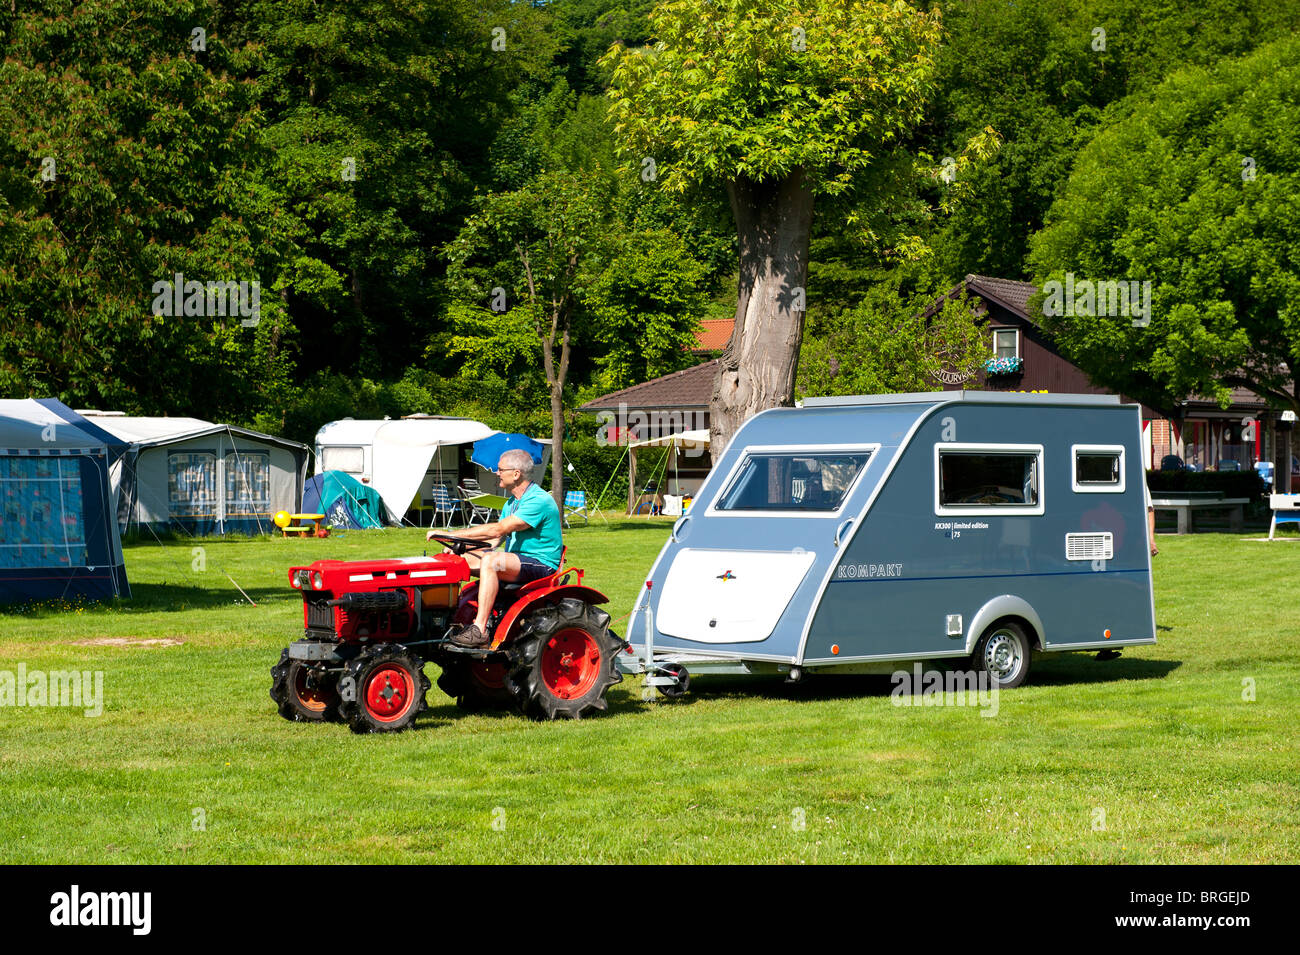 Tractor With Caravan High Resolution Stock Photography and Images - Alamy